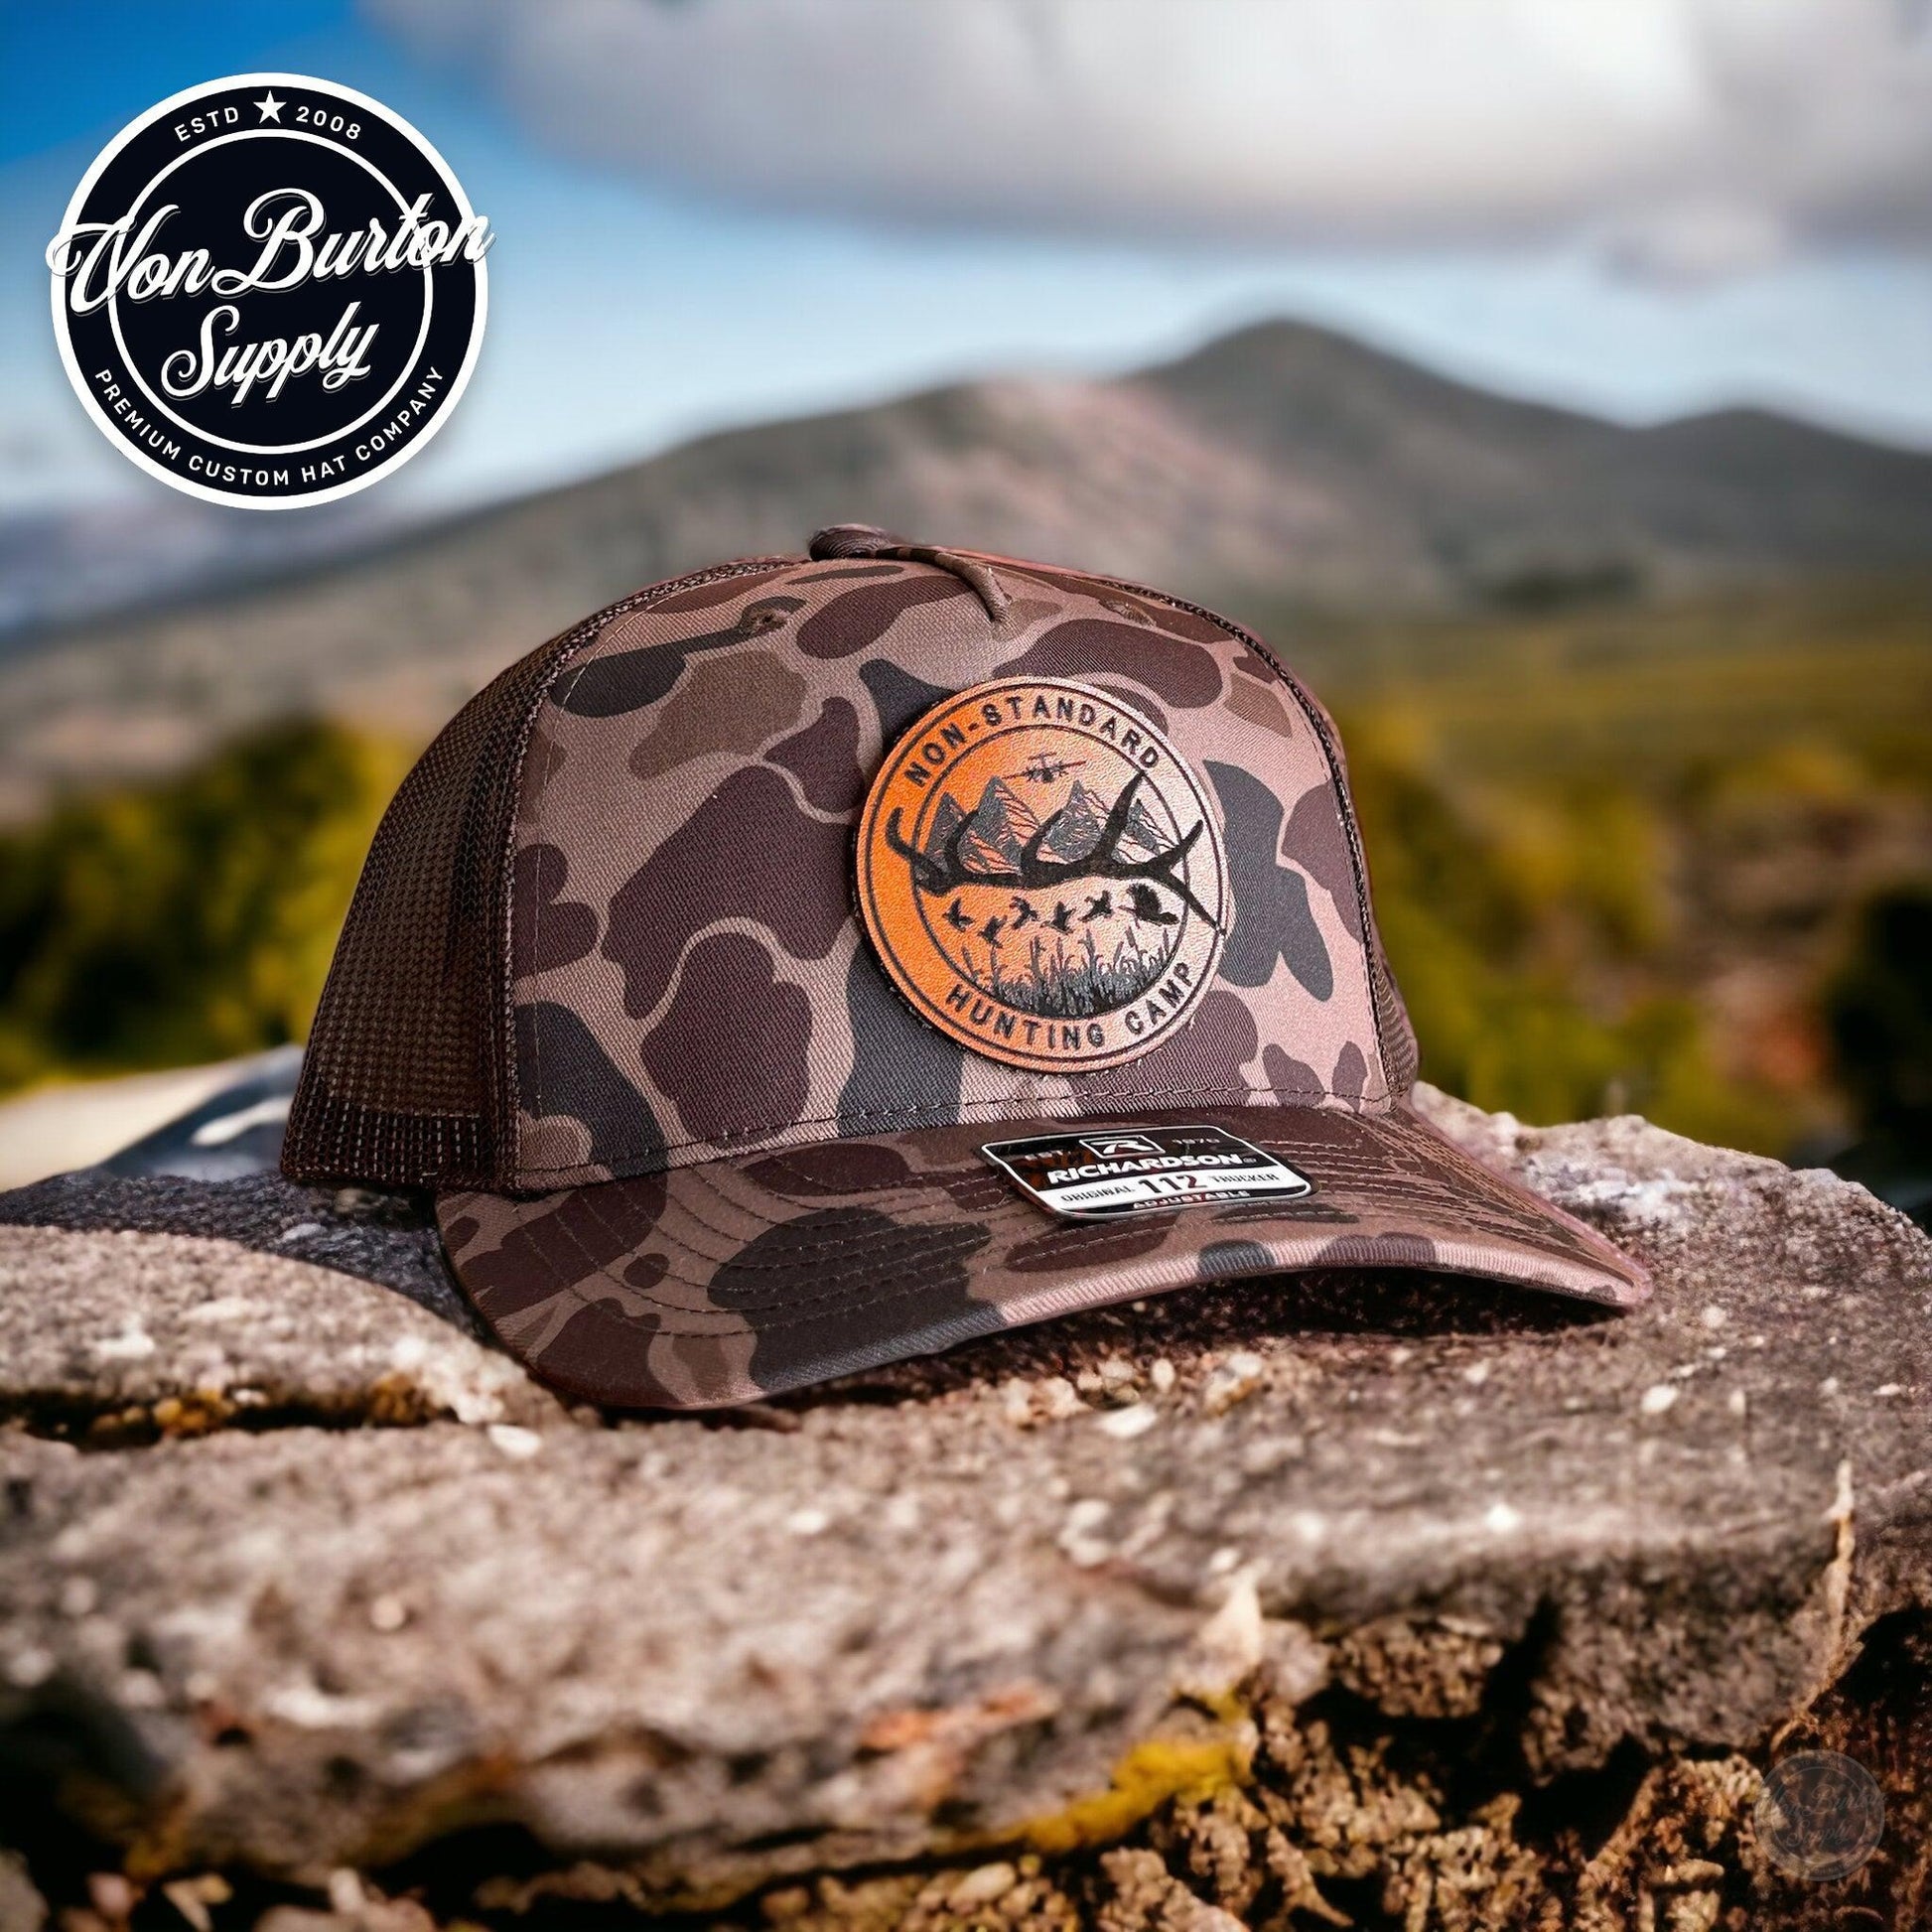 New Old School Duck Camo with Leather Patch Hat